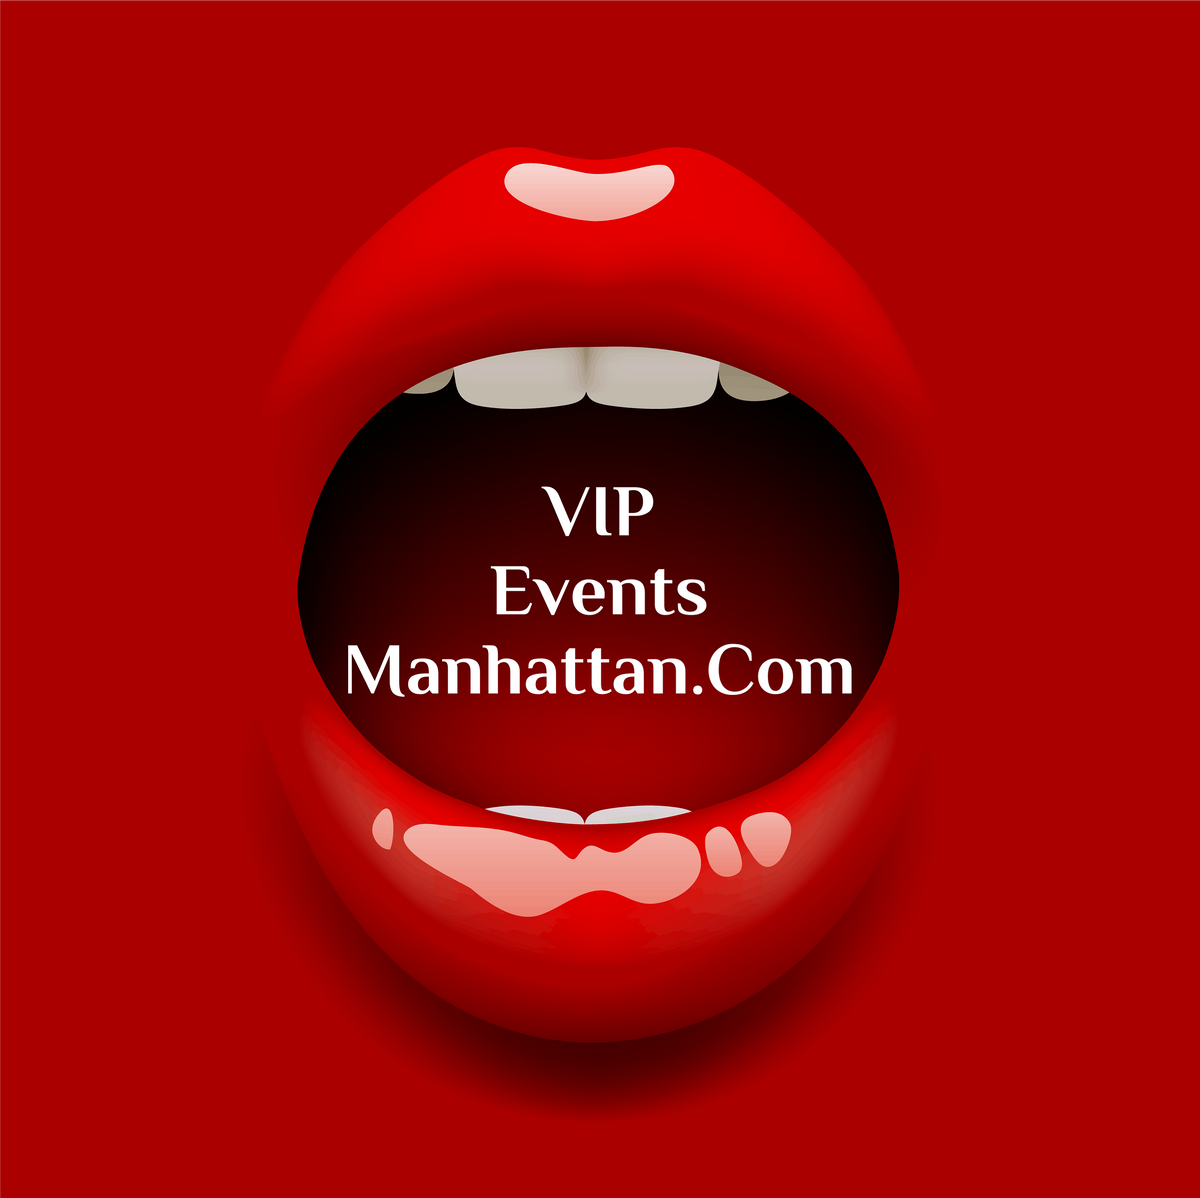 Private VIP Gentlemens Club, June 30th, 8 pm to 2 am, NYC